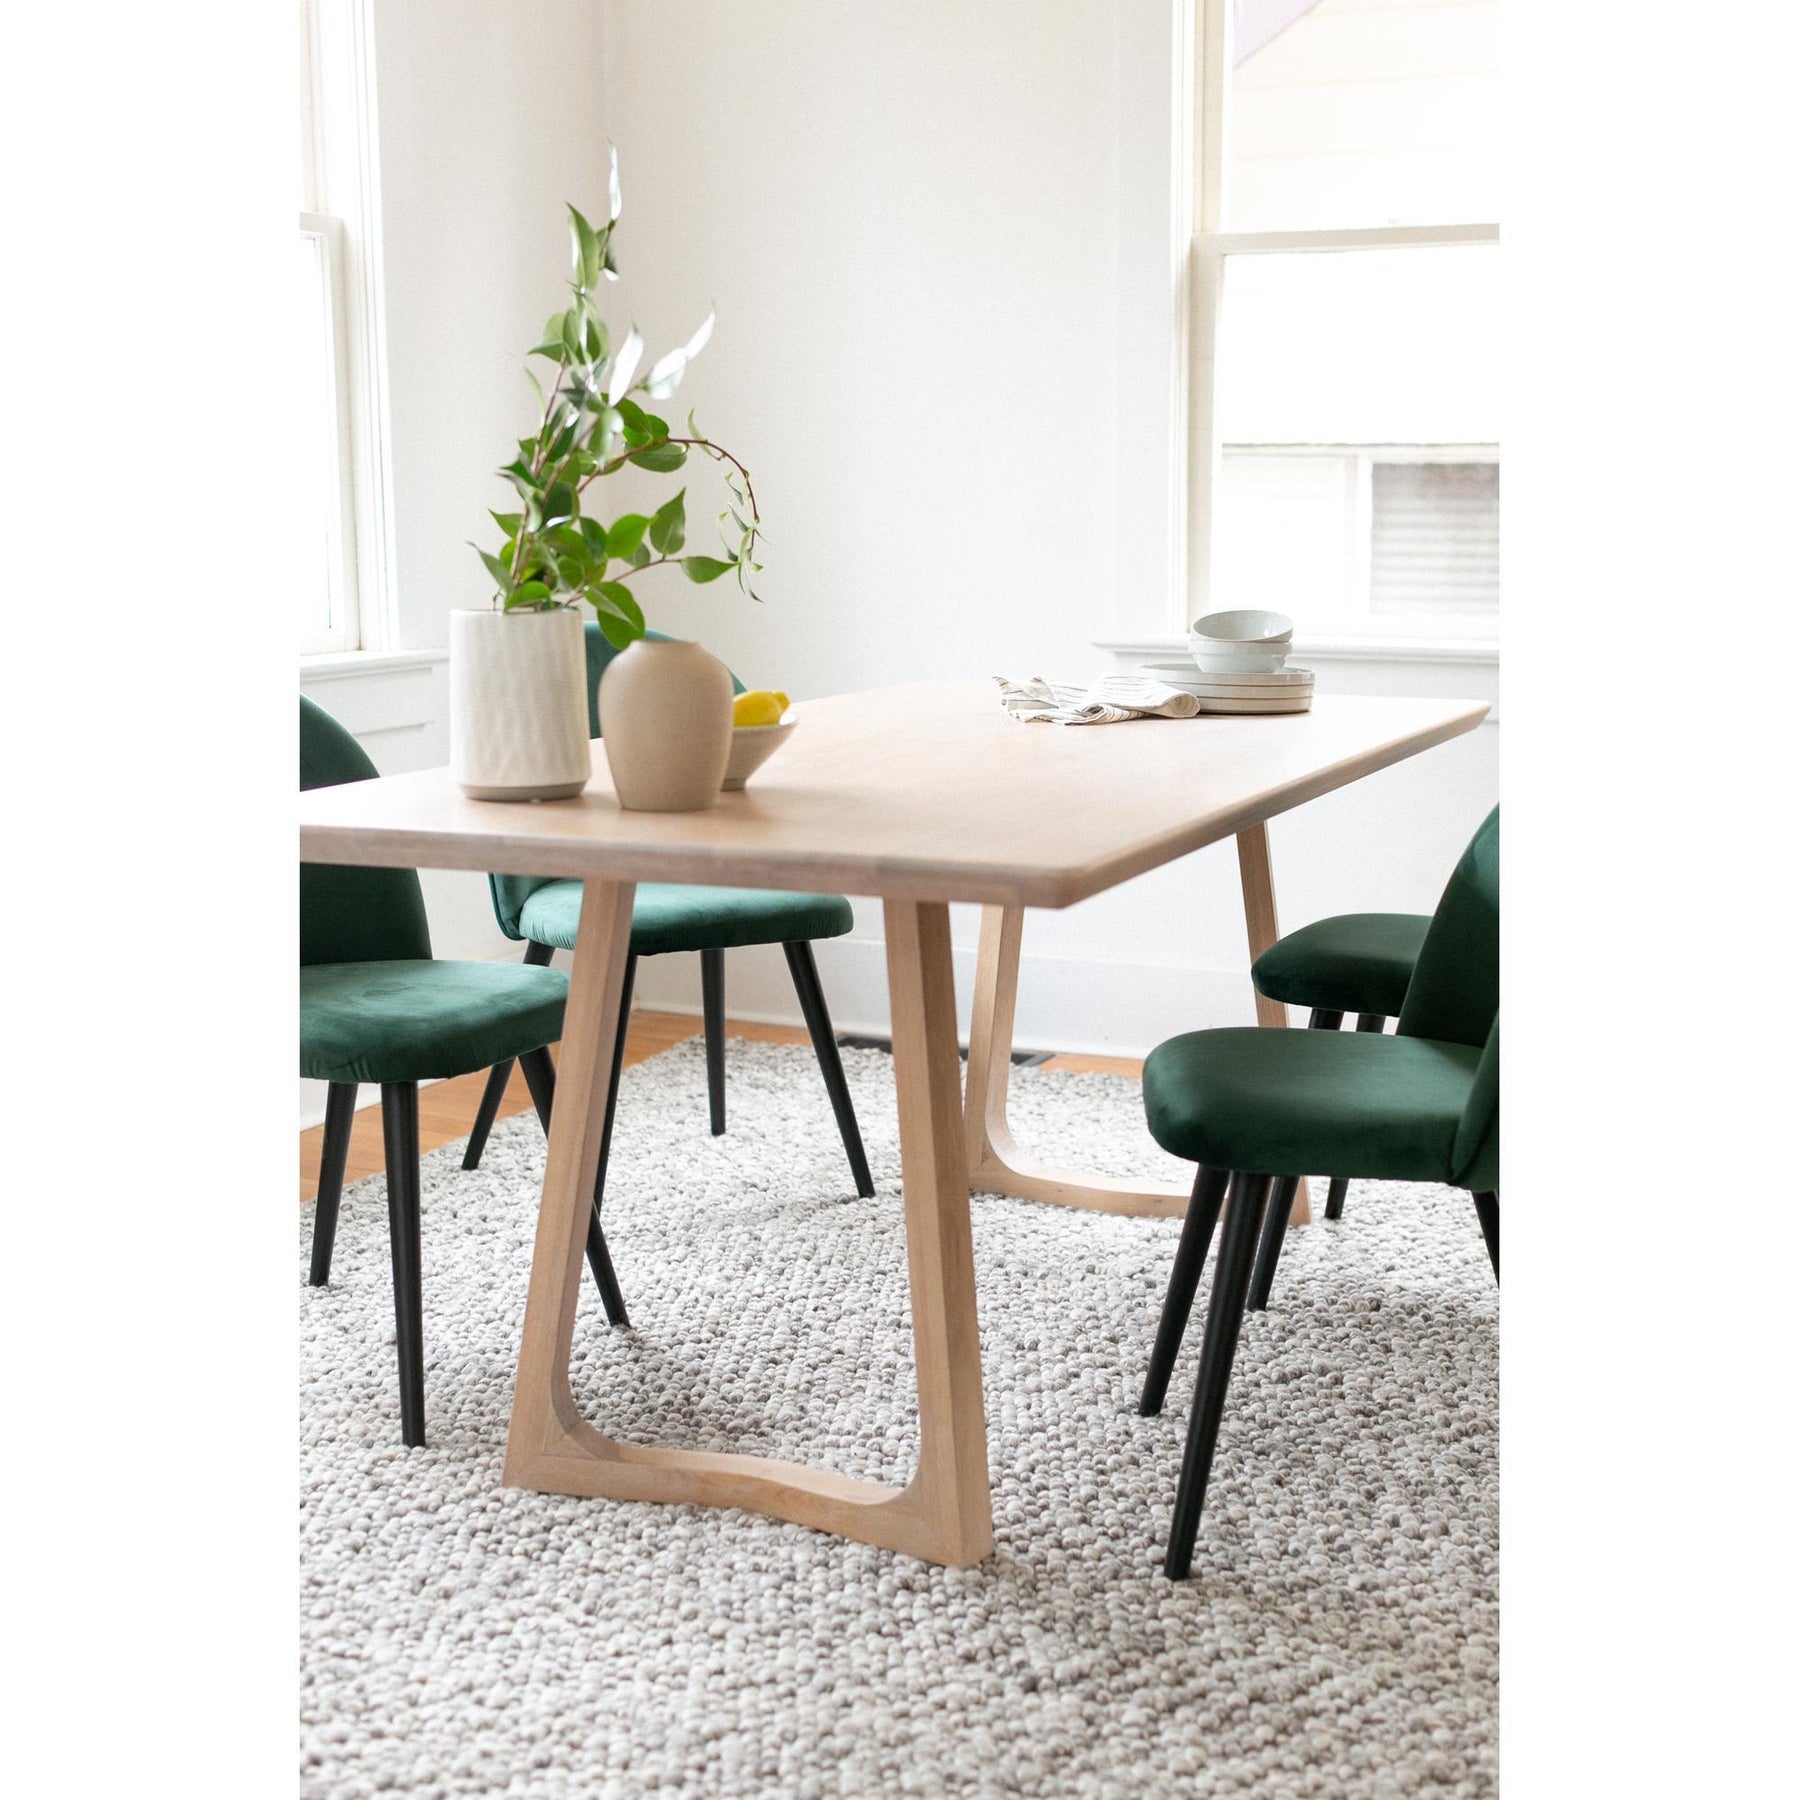 Moe's Home Collection Silas Dining Table Oak - BC-1098-18